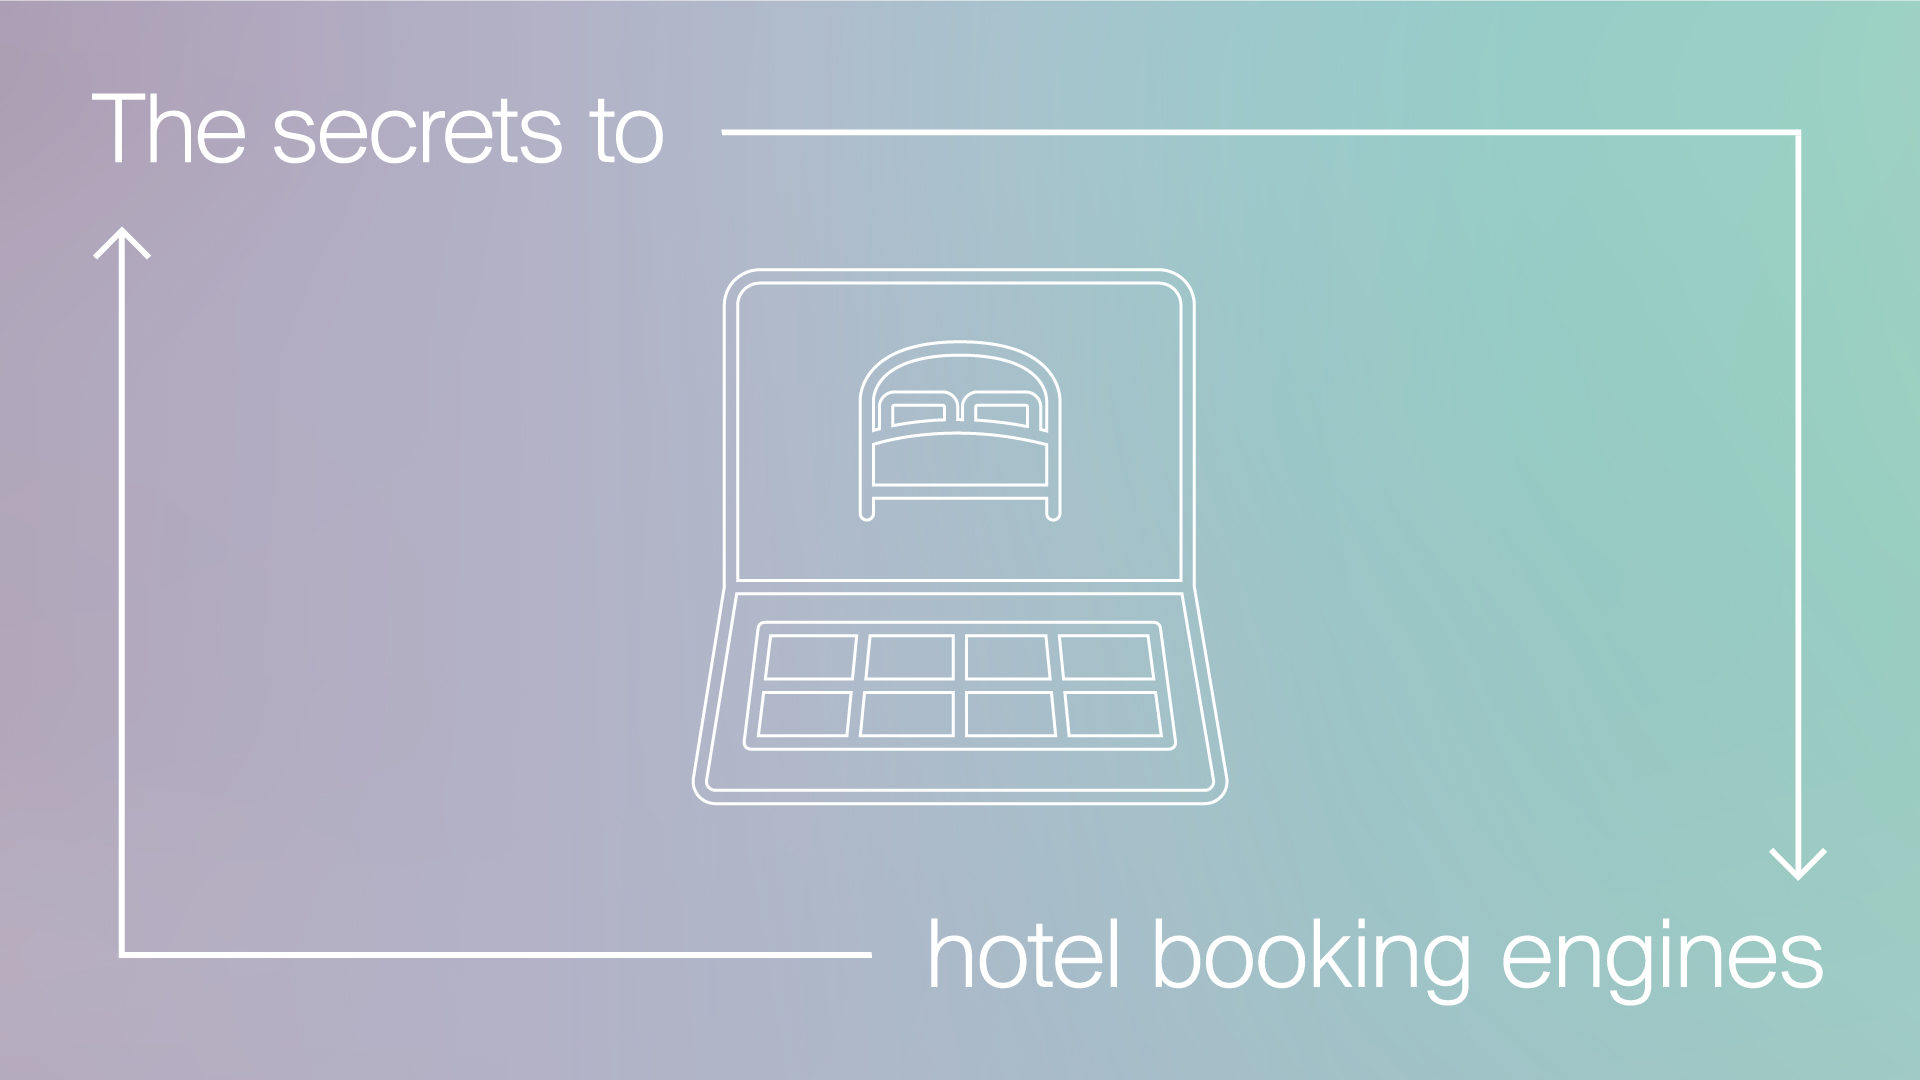 The secrets to hotel booking engines